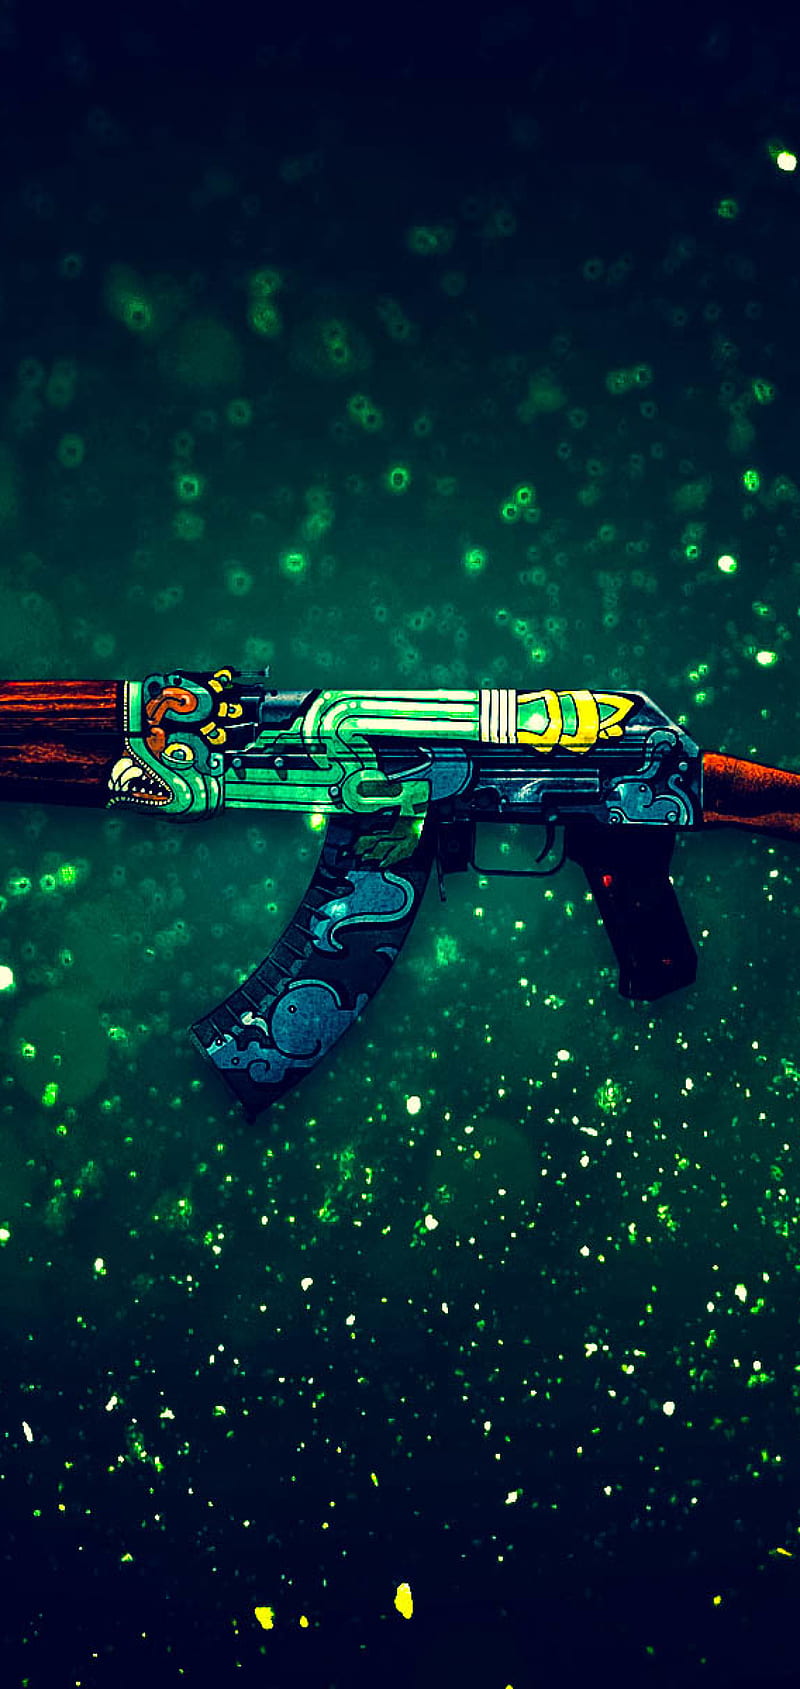 60 AK47 HD Wallpapers and Backgrounds